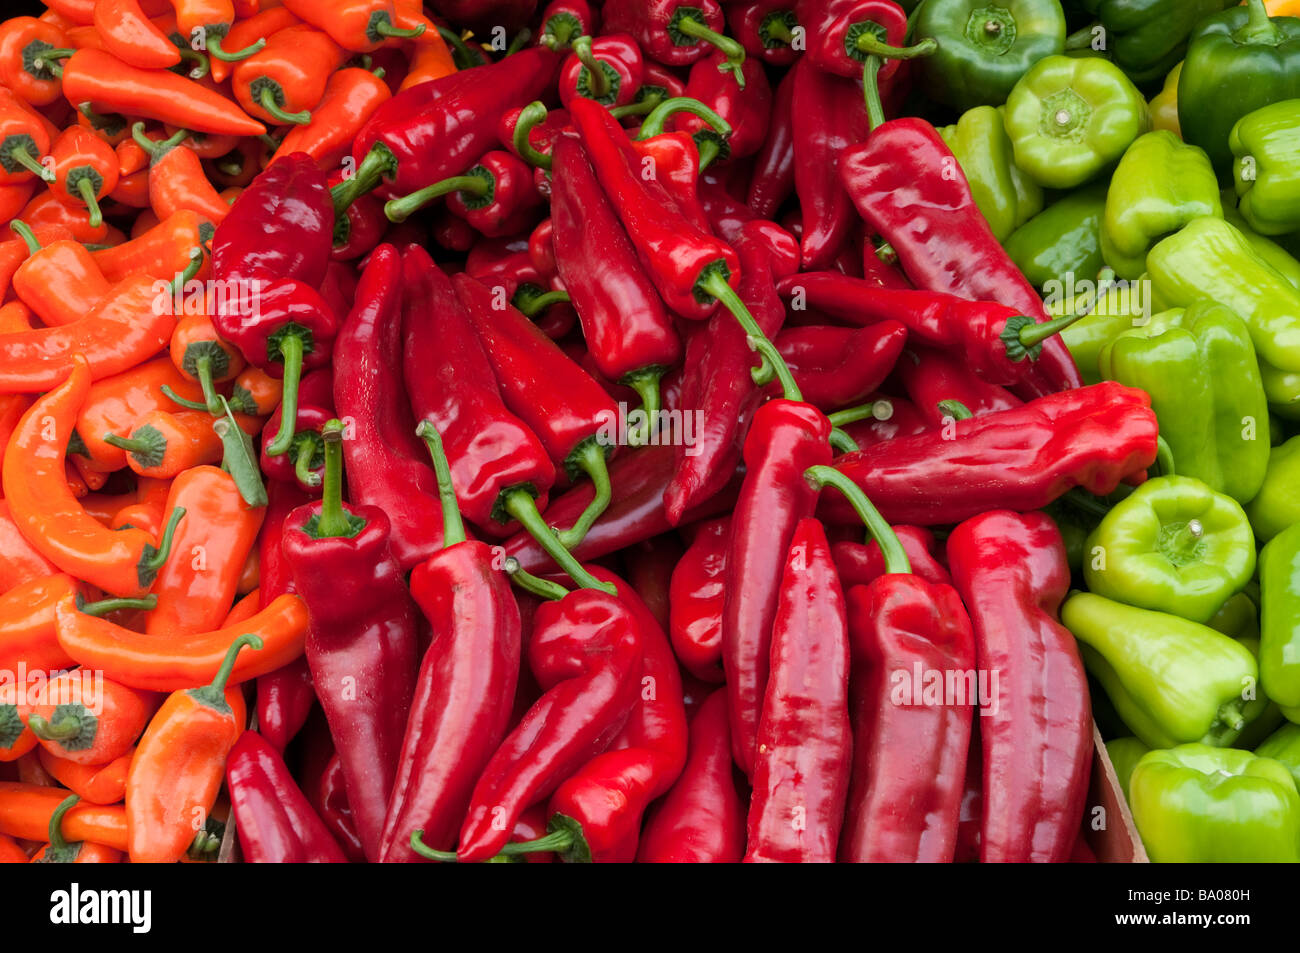 Red peppers on food stall in Carmel Market Stock Photo